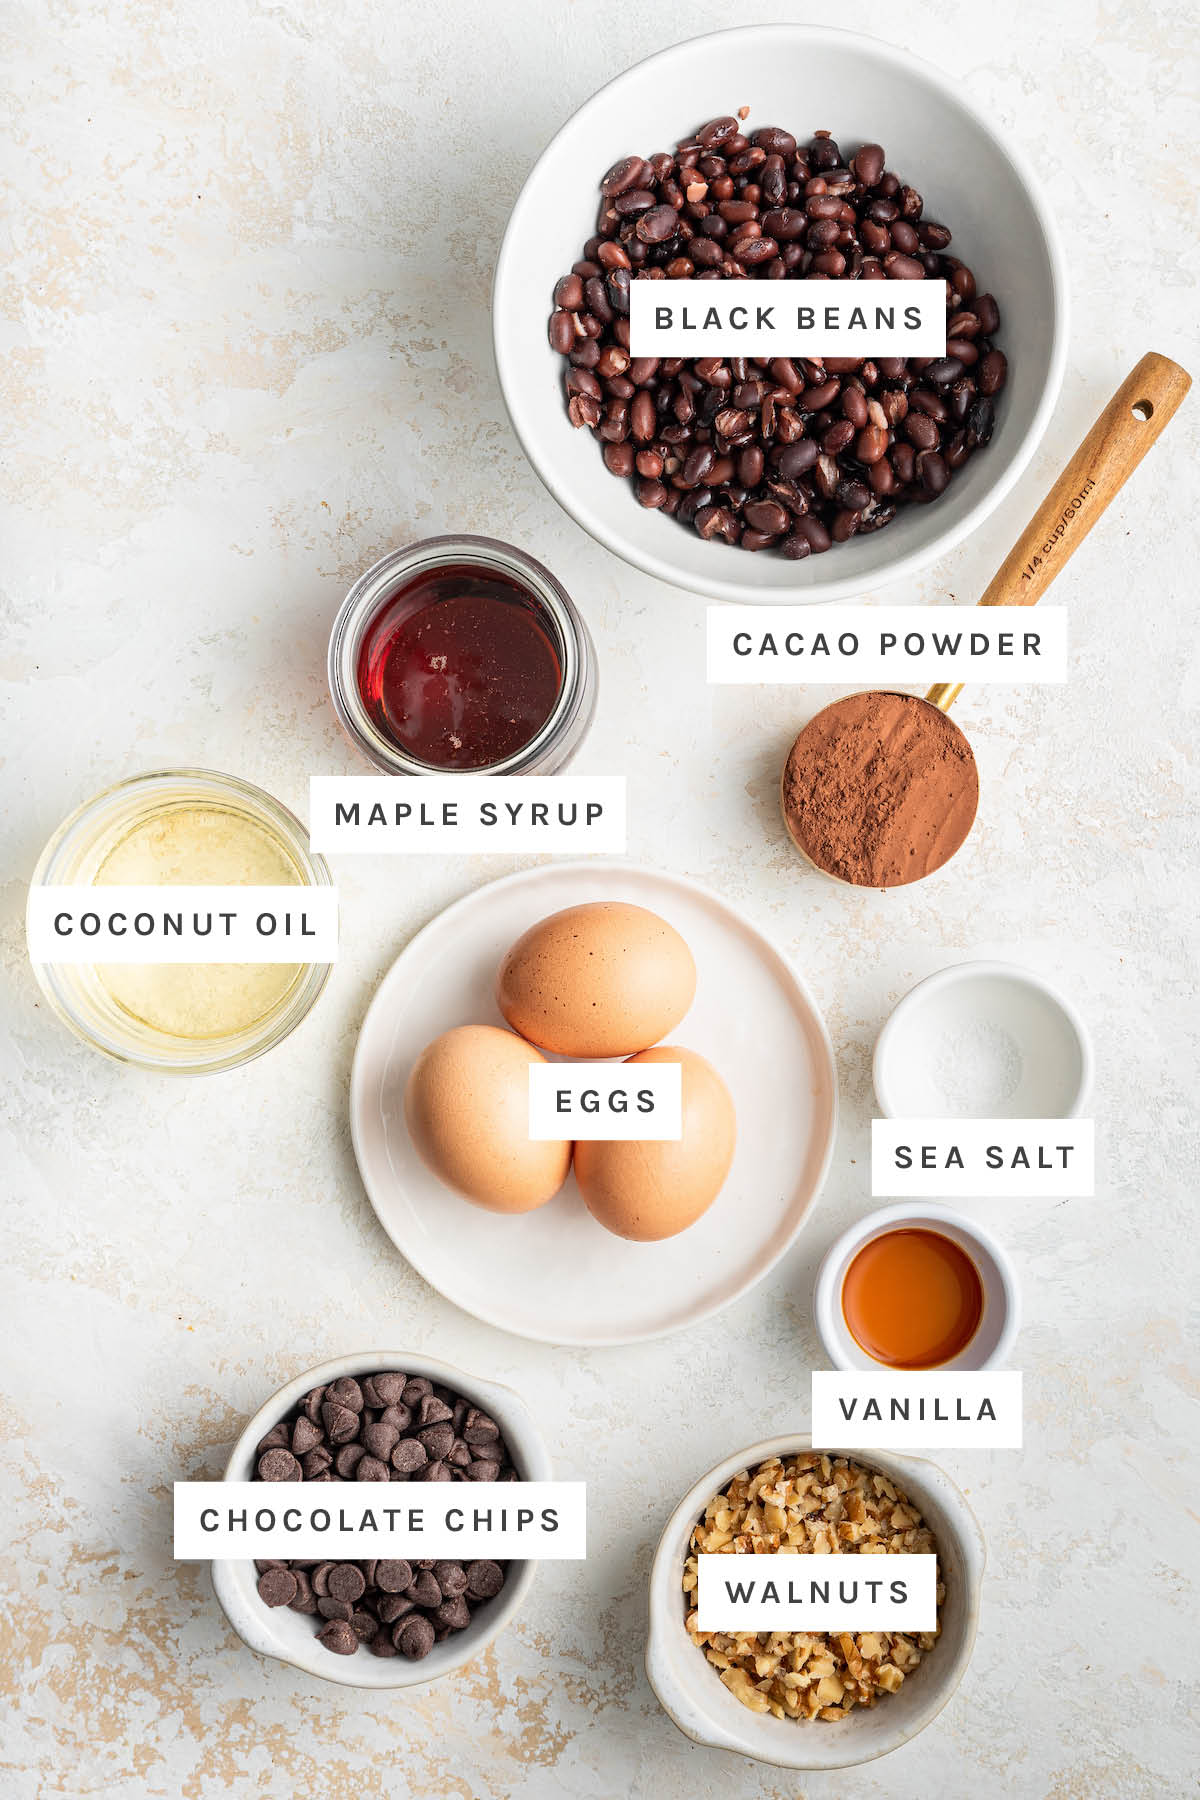 Ingredients measured out to make Fudgy Black Bean Brownies: black beans, maple syrup, cacao powder, coconut oil, eggs, sea salt, vanilla, chocolate chips and walnuts.